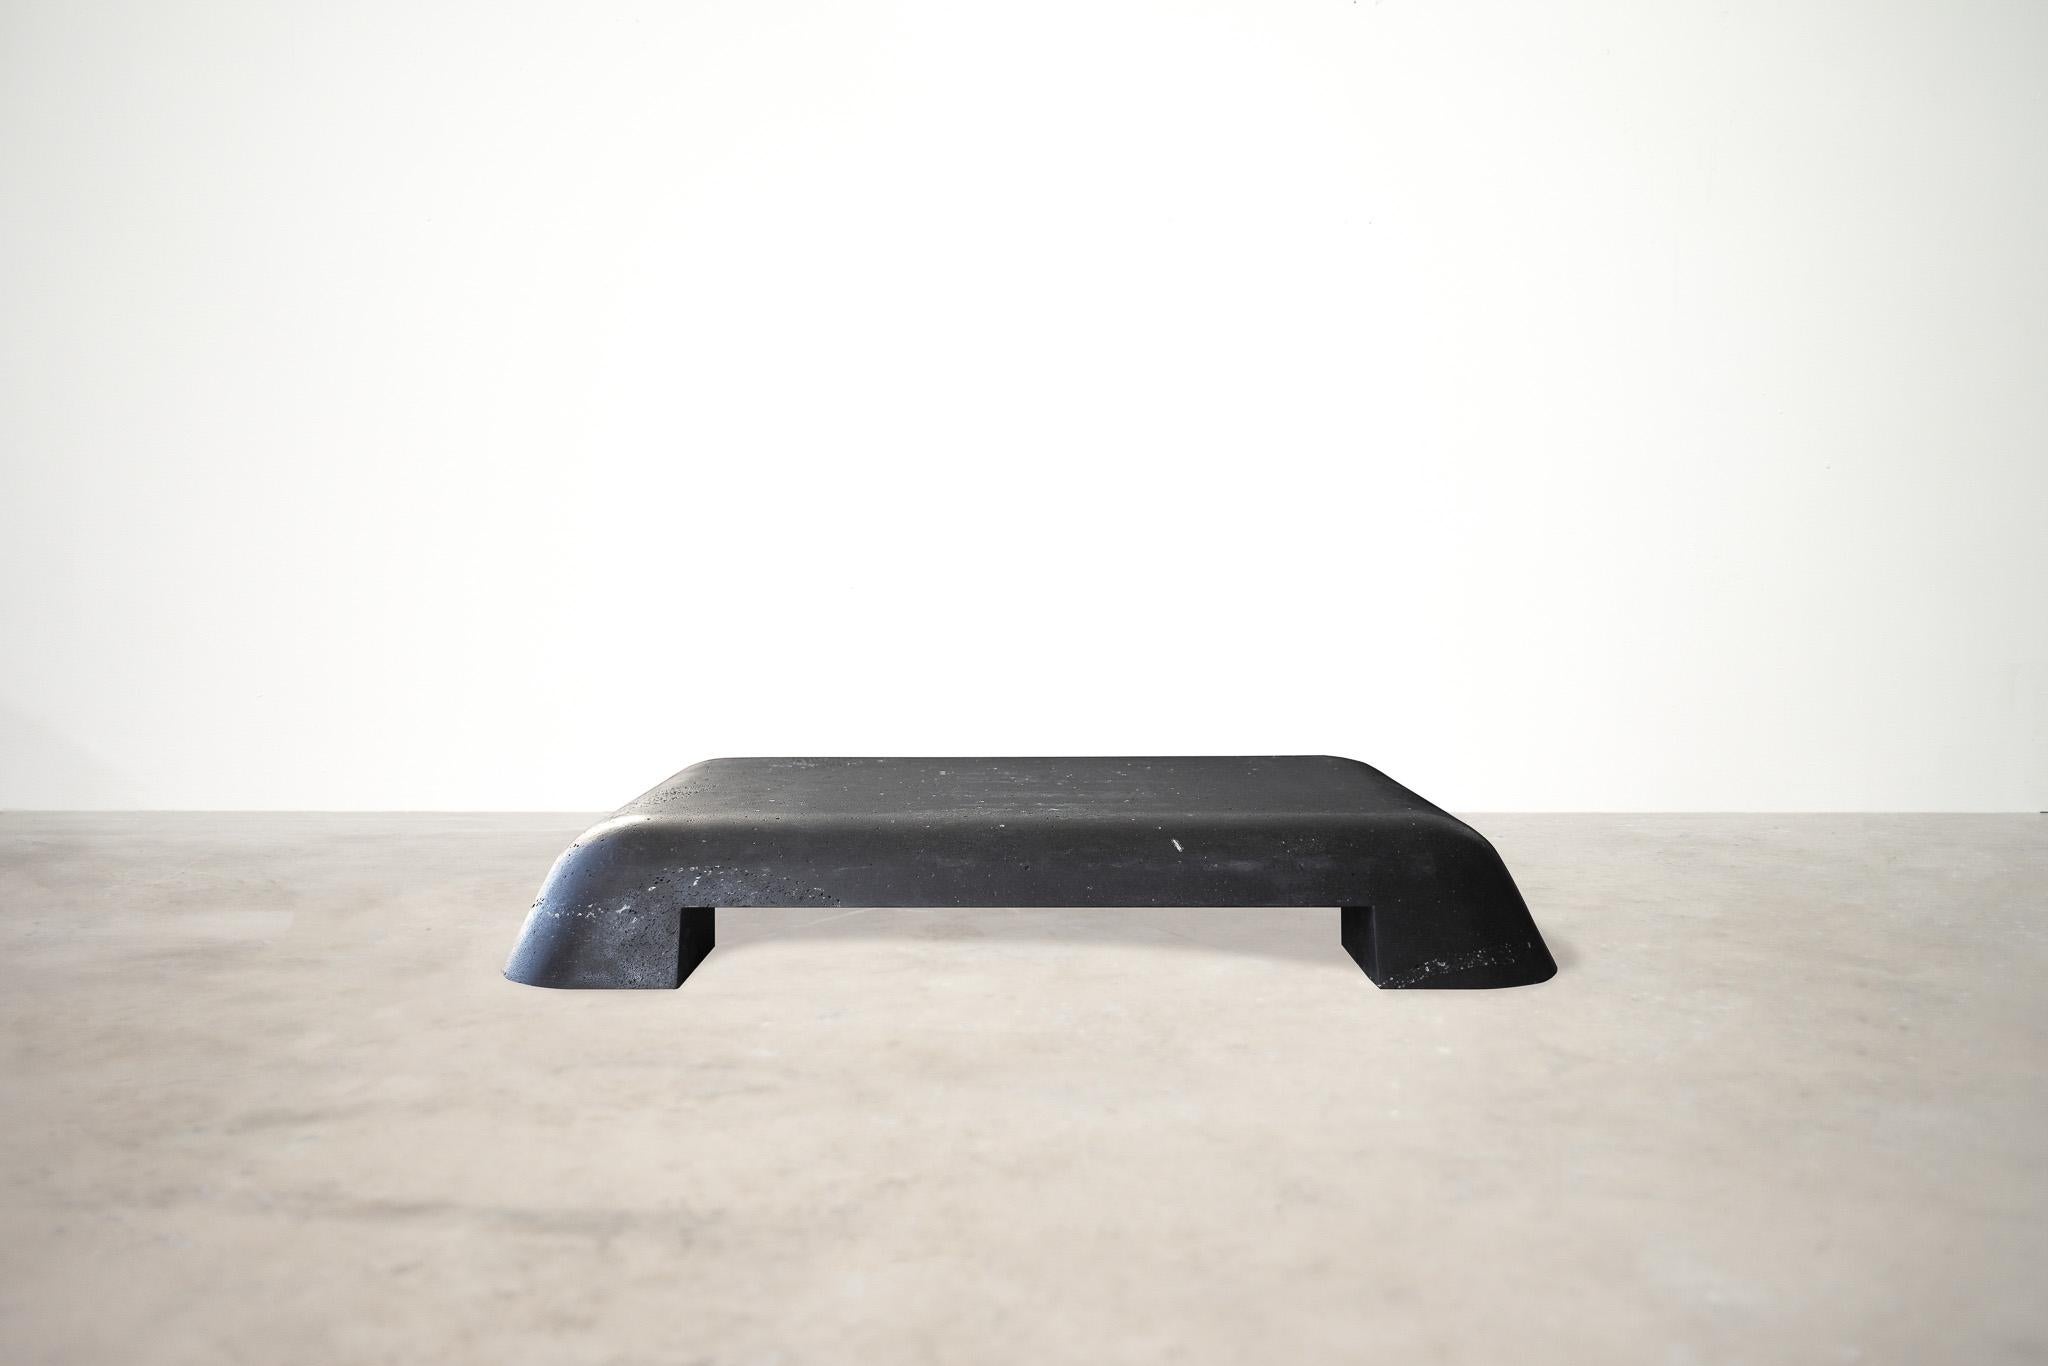 Lyft Table by Lucas Tyra Morten
2022
Limited edition of 6
Dimensions: W 128 x D 96 x H 18 cm
Material: Icelandic basalt stone

Occupying the liminal space between art and design, the multidisciplinary atelier of Lucas and Tyra Morten is a small